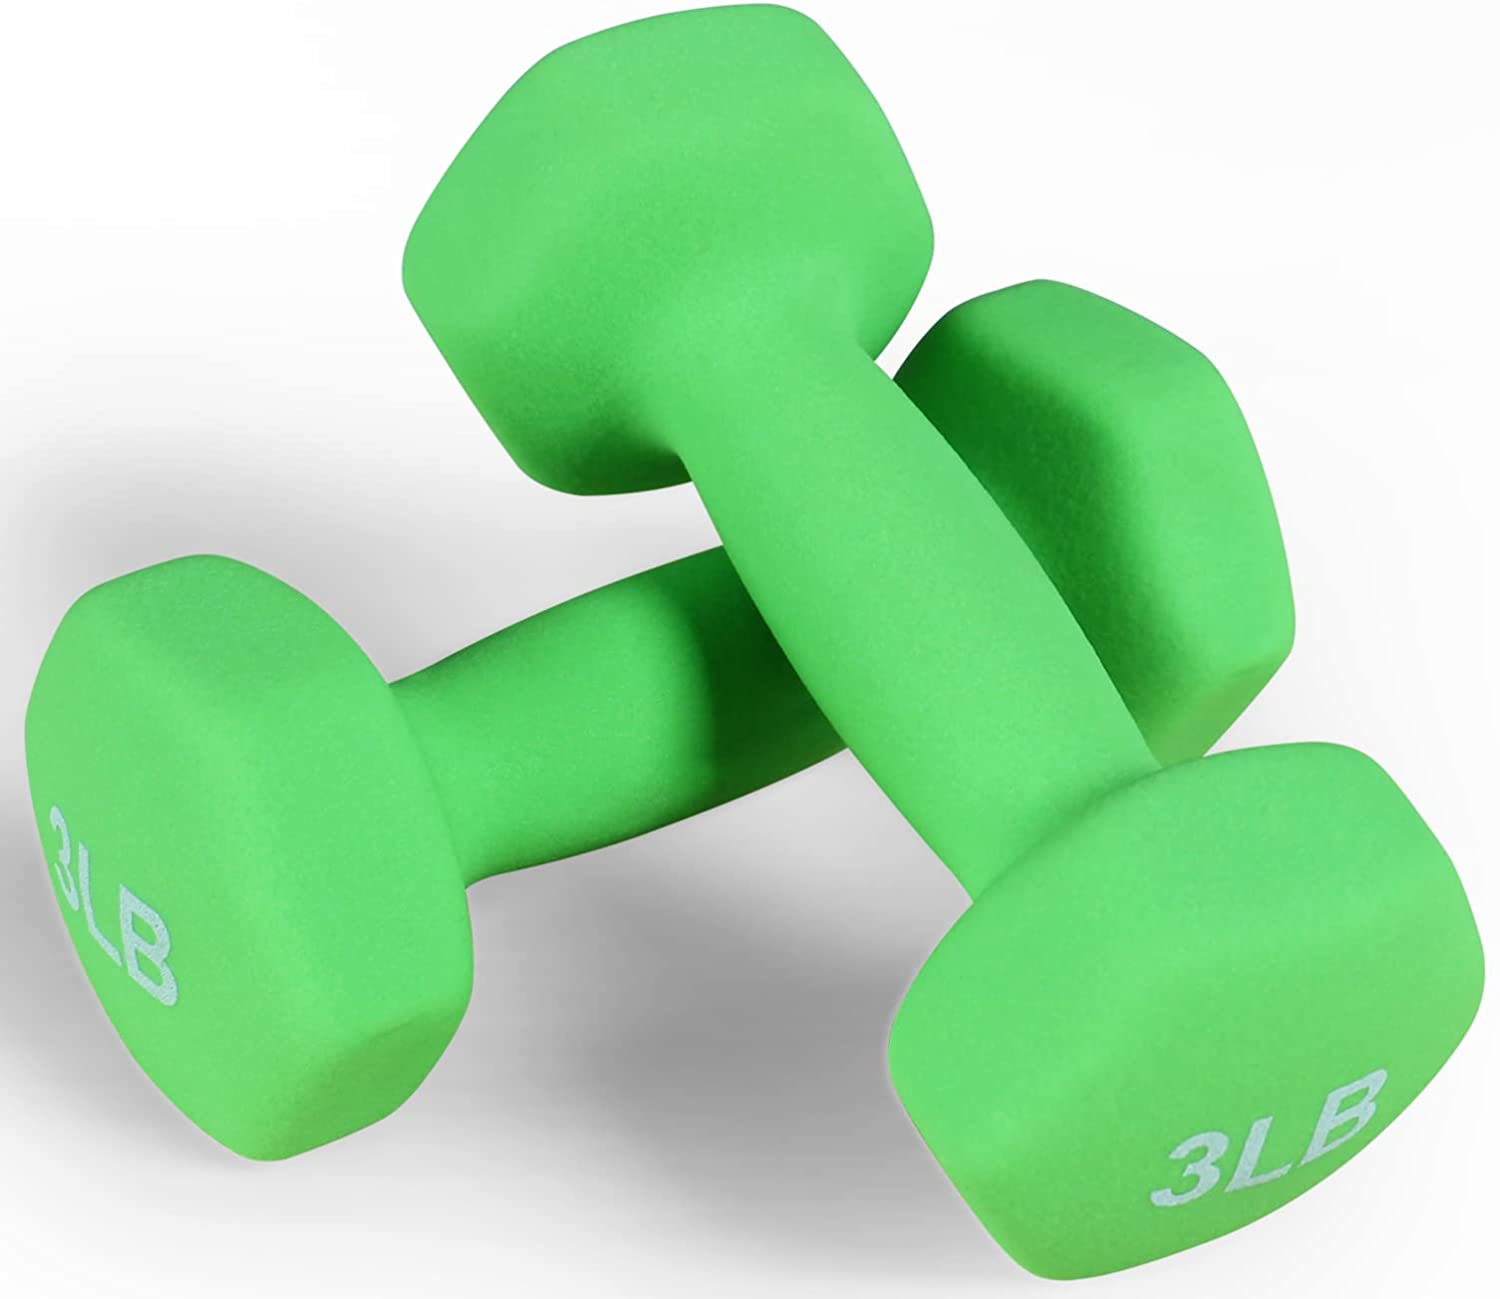 BalanceFrom Neoprene Dumbbell Hand Weights, Anti-Slip, Anti-roll, Hex Shape Colorful, Pair or Set with Stand